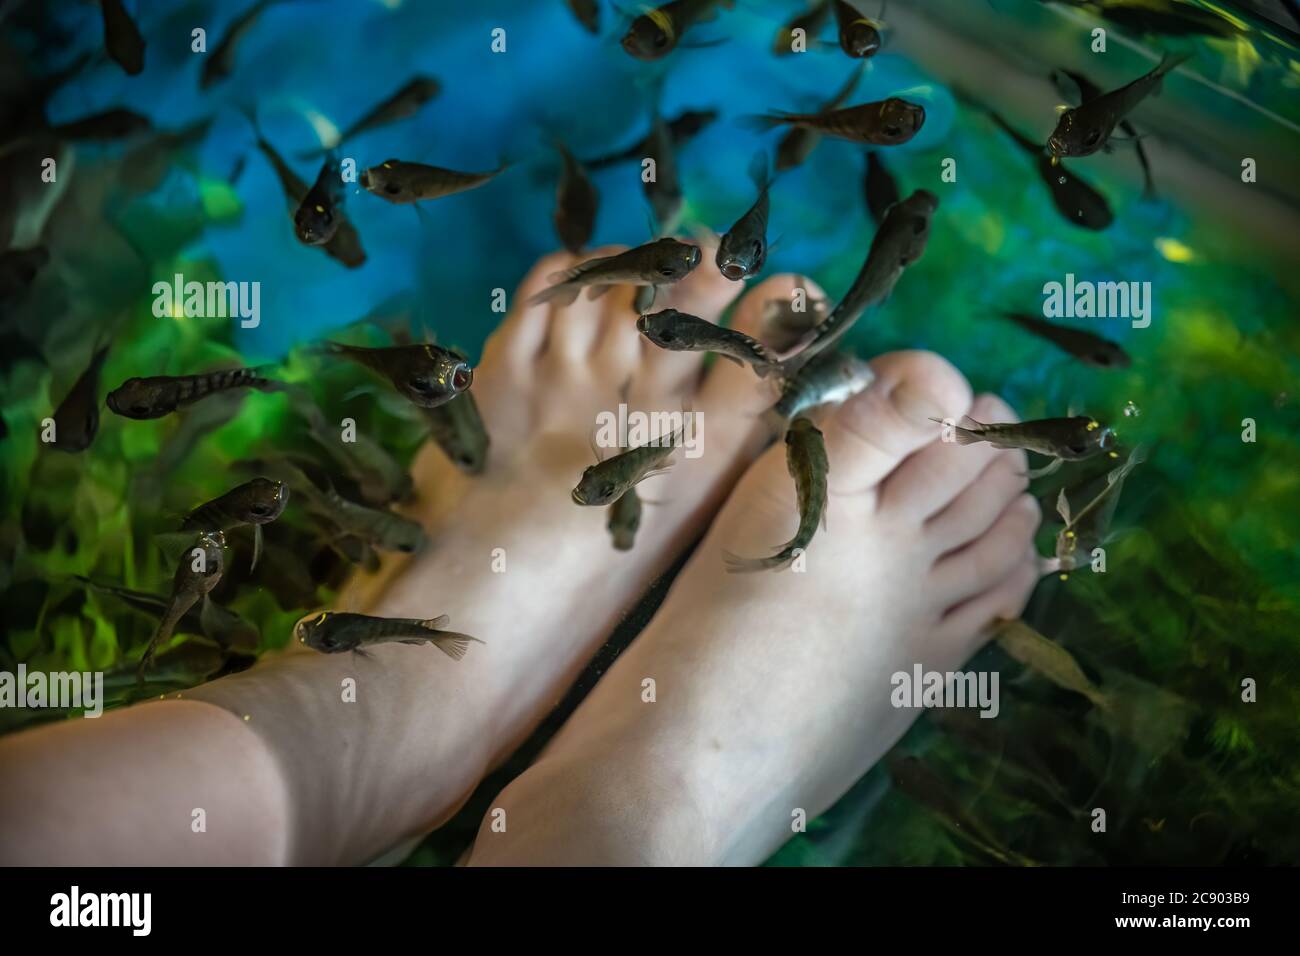 Man holding feet in a water tank filled with rufa garra fishes in chinese spa pedicure skin care treatment, Fenghuang, China Stock Photo